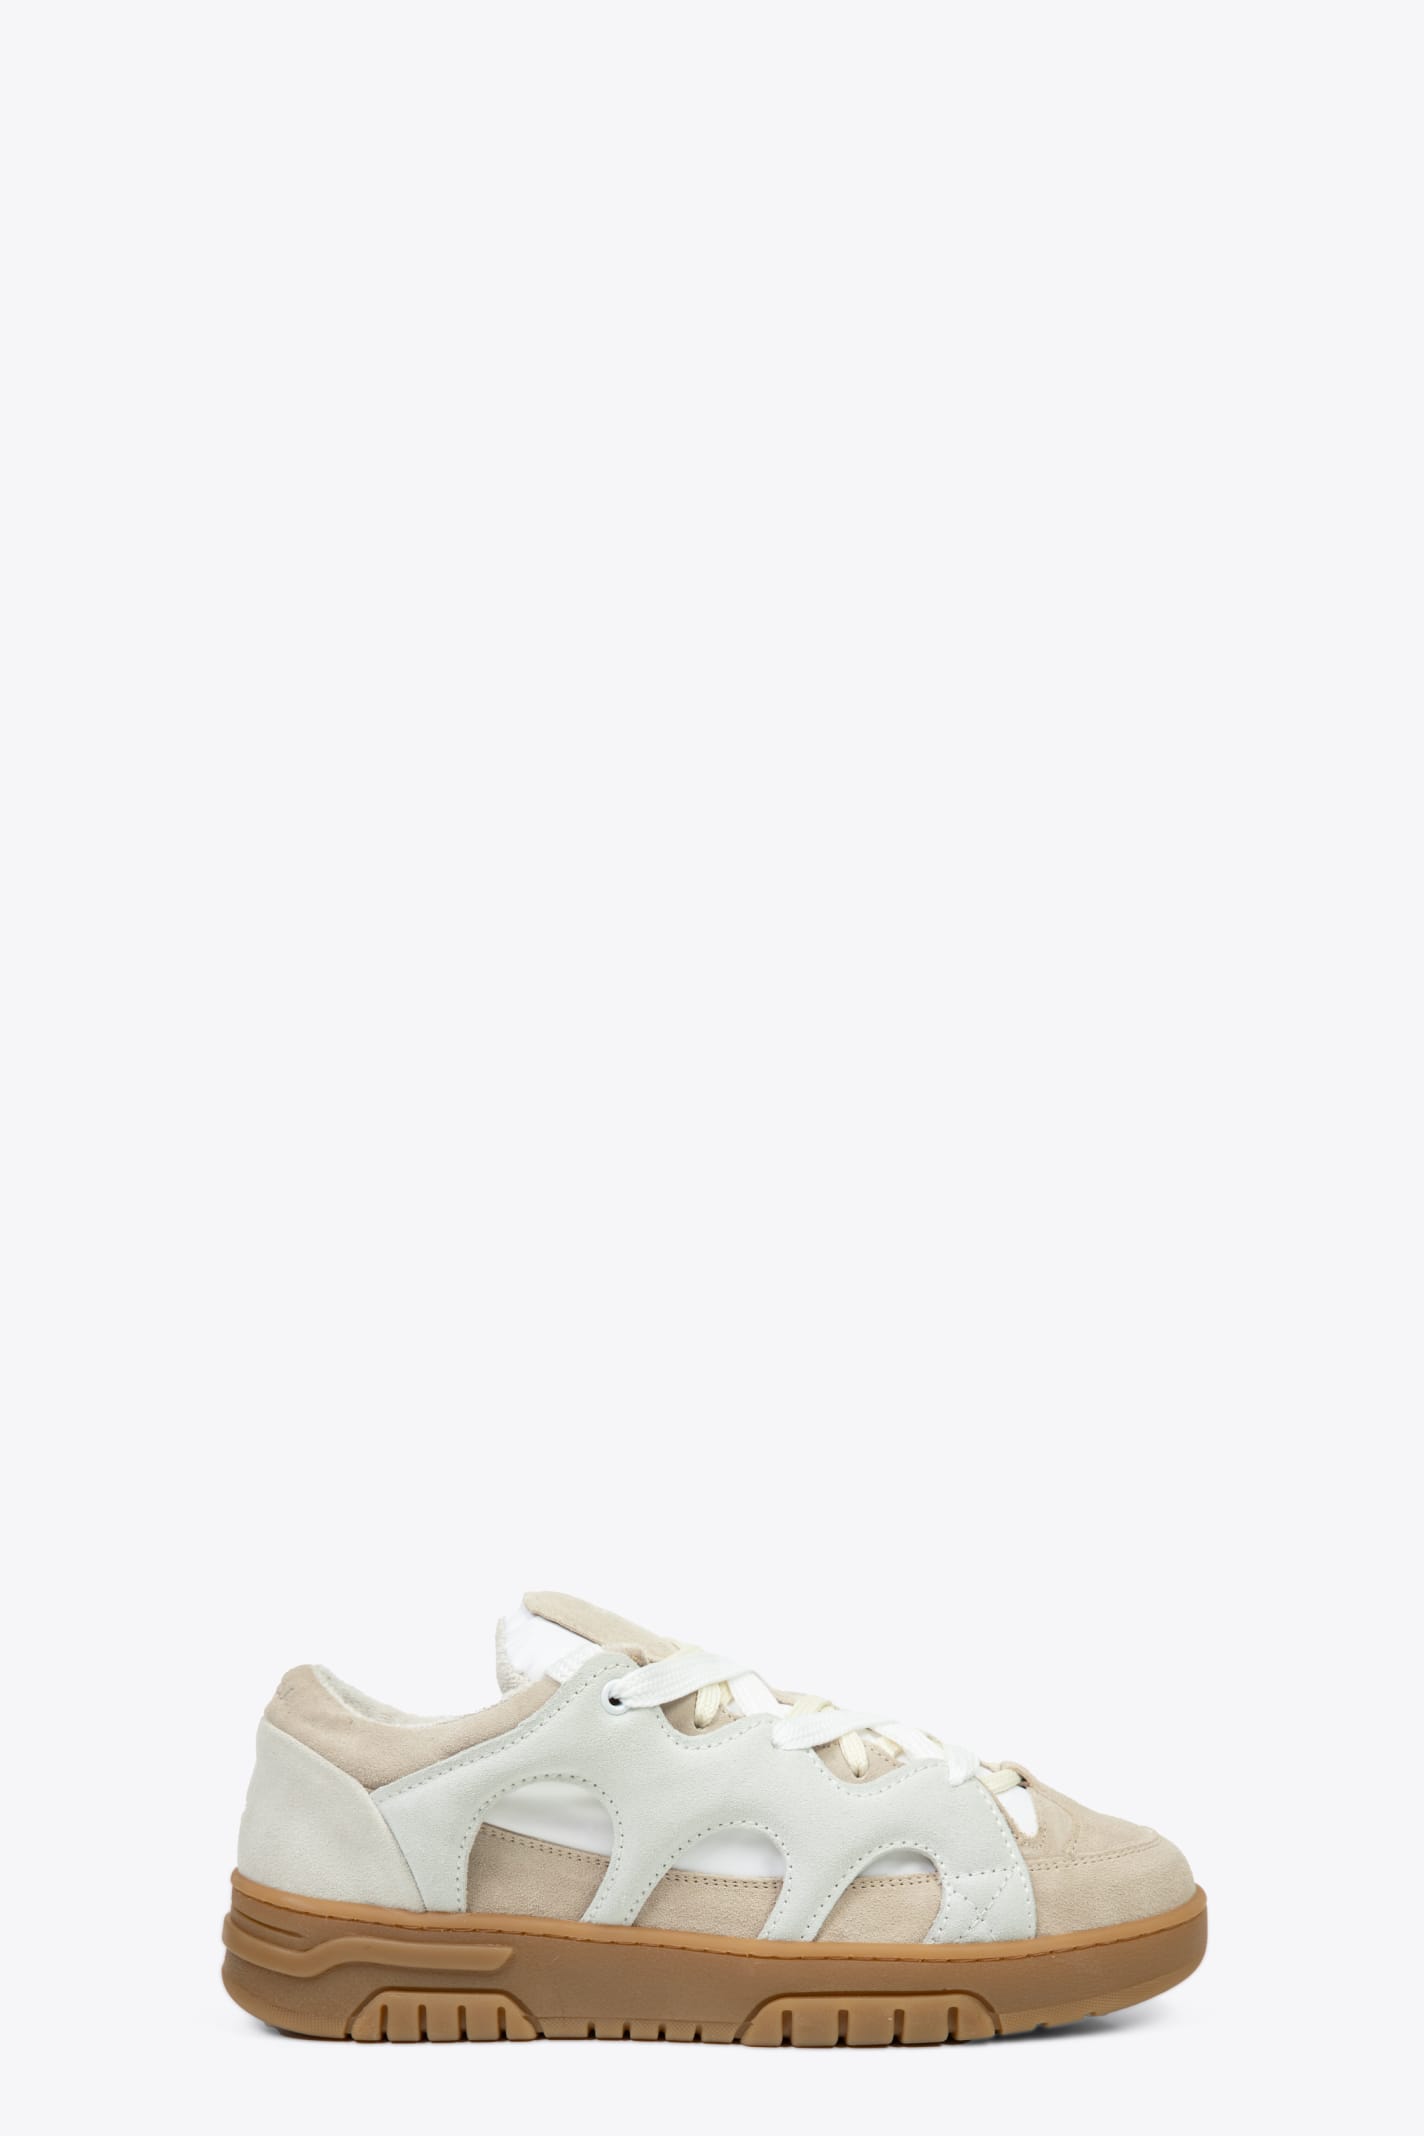 Paura Tr - Suede - New Bomber White Nylon And Beige Suede Low Trainer In Crema/bianco